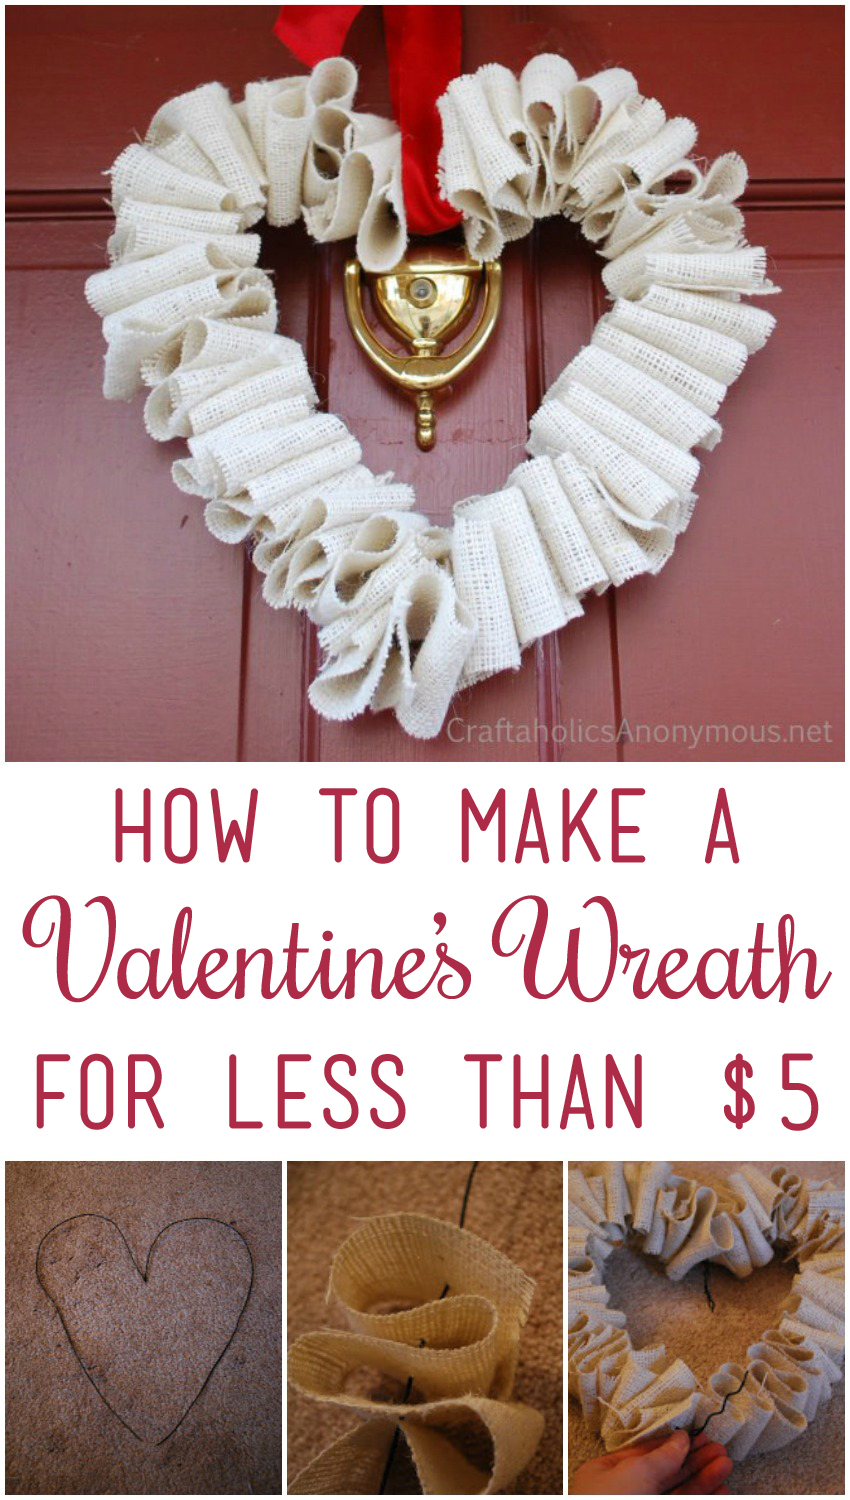 How to Make a Valentine's Wreath for Less than $5 | Craftaholics Anonymous®